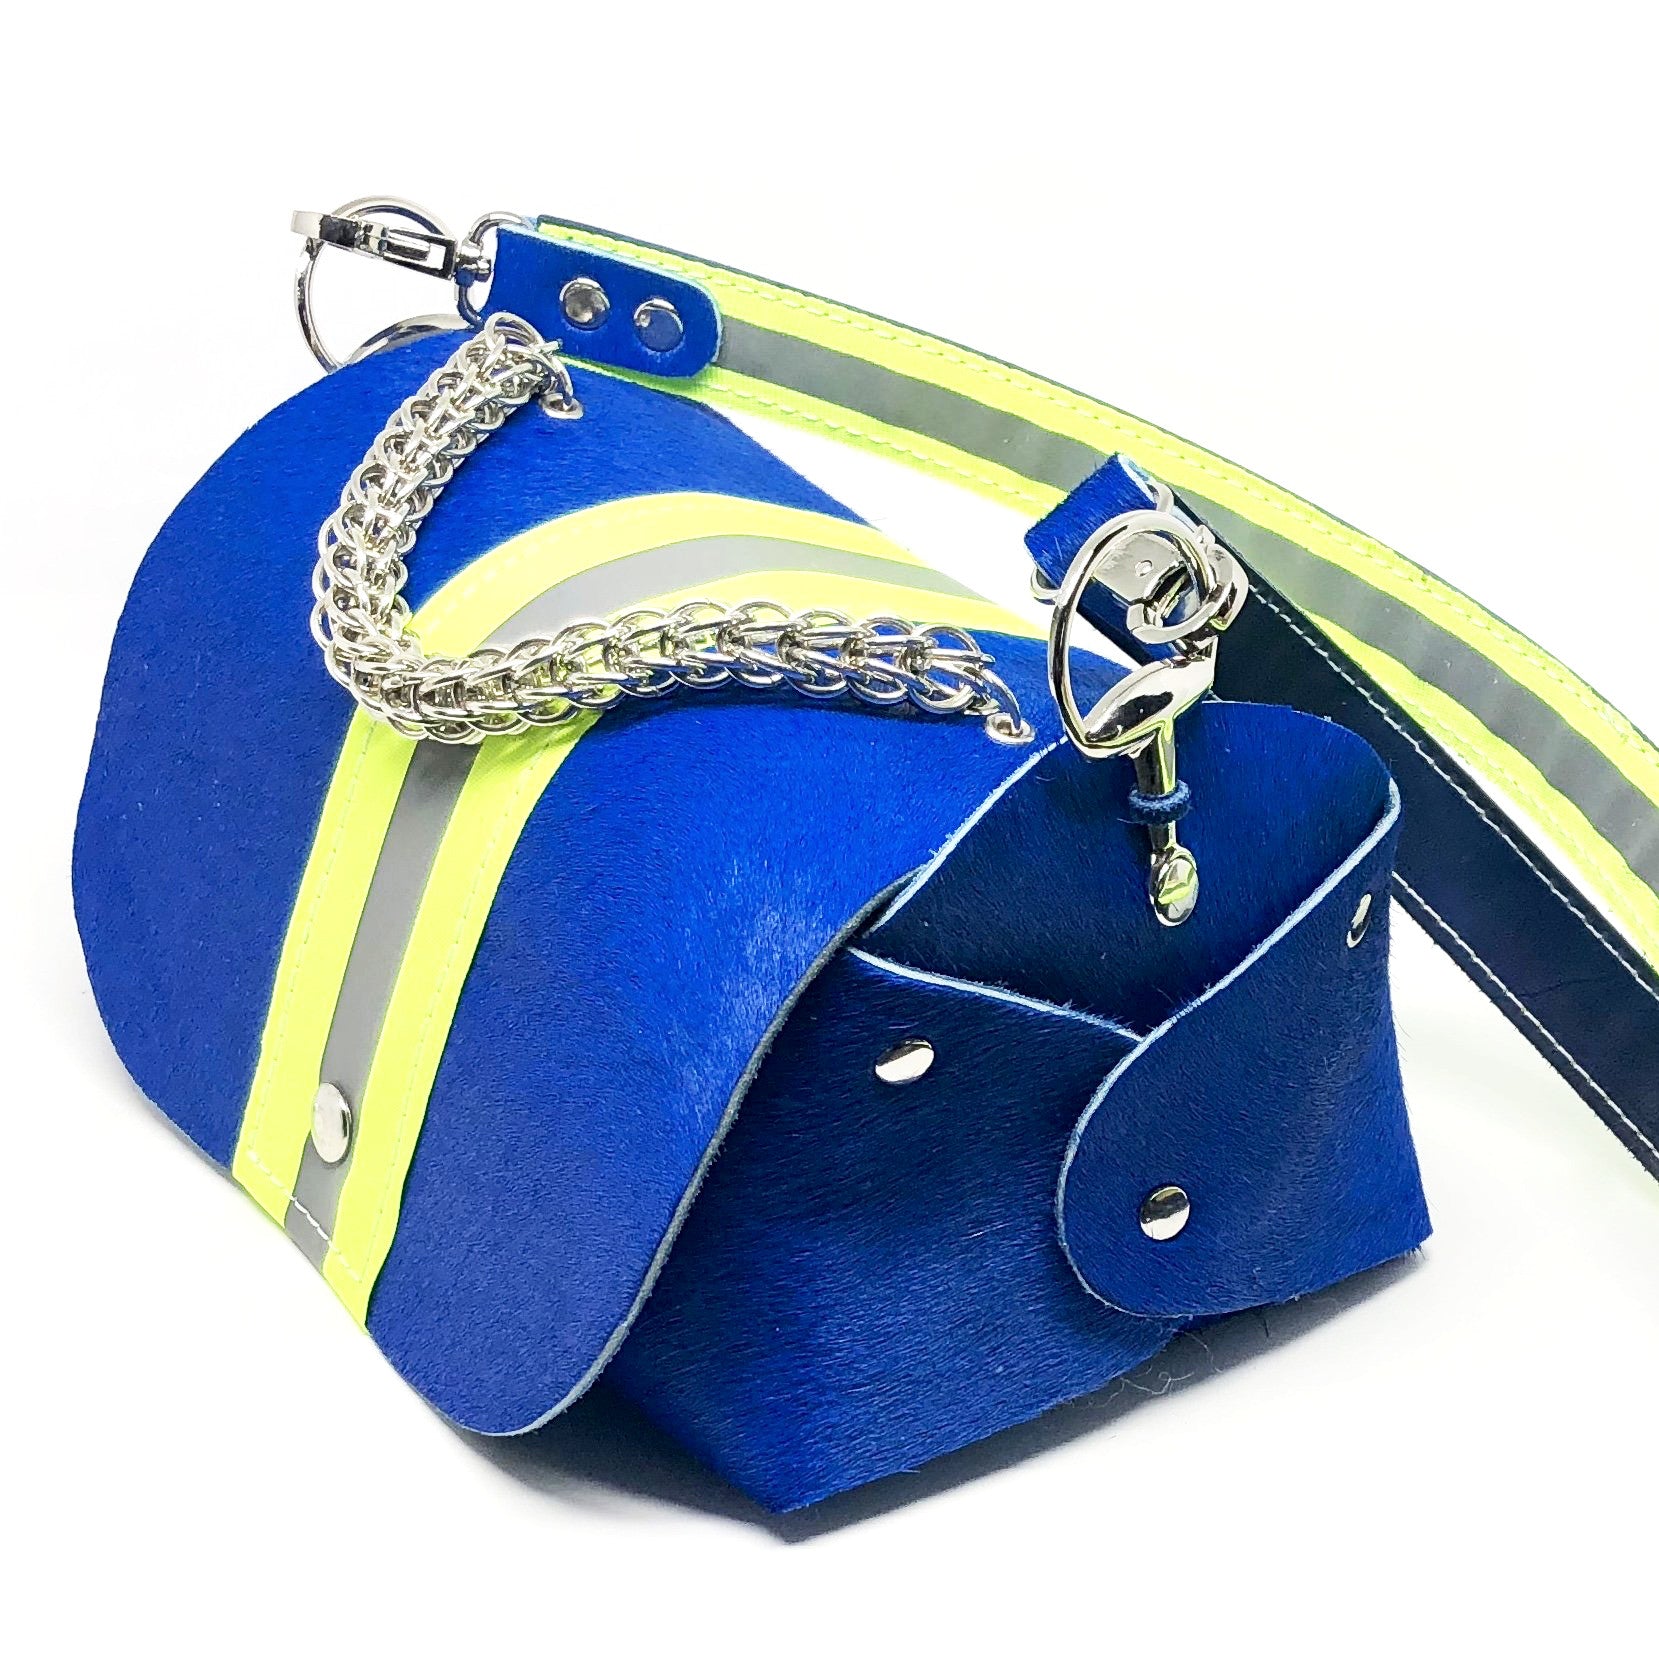 HAIR-ON COWHIDE LEATHER WITH WIDE NEON YELLOW REFLECTIVE TRIM. By NYET Jewelry.